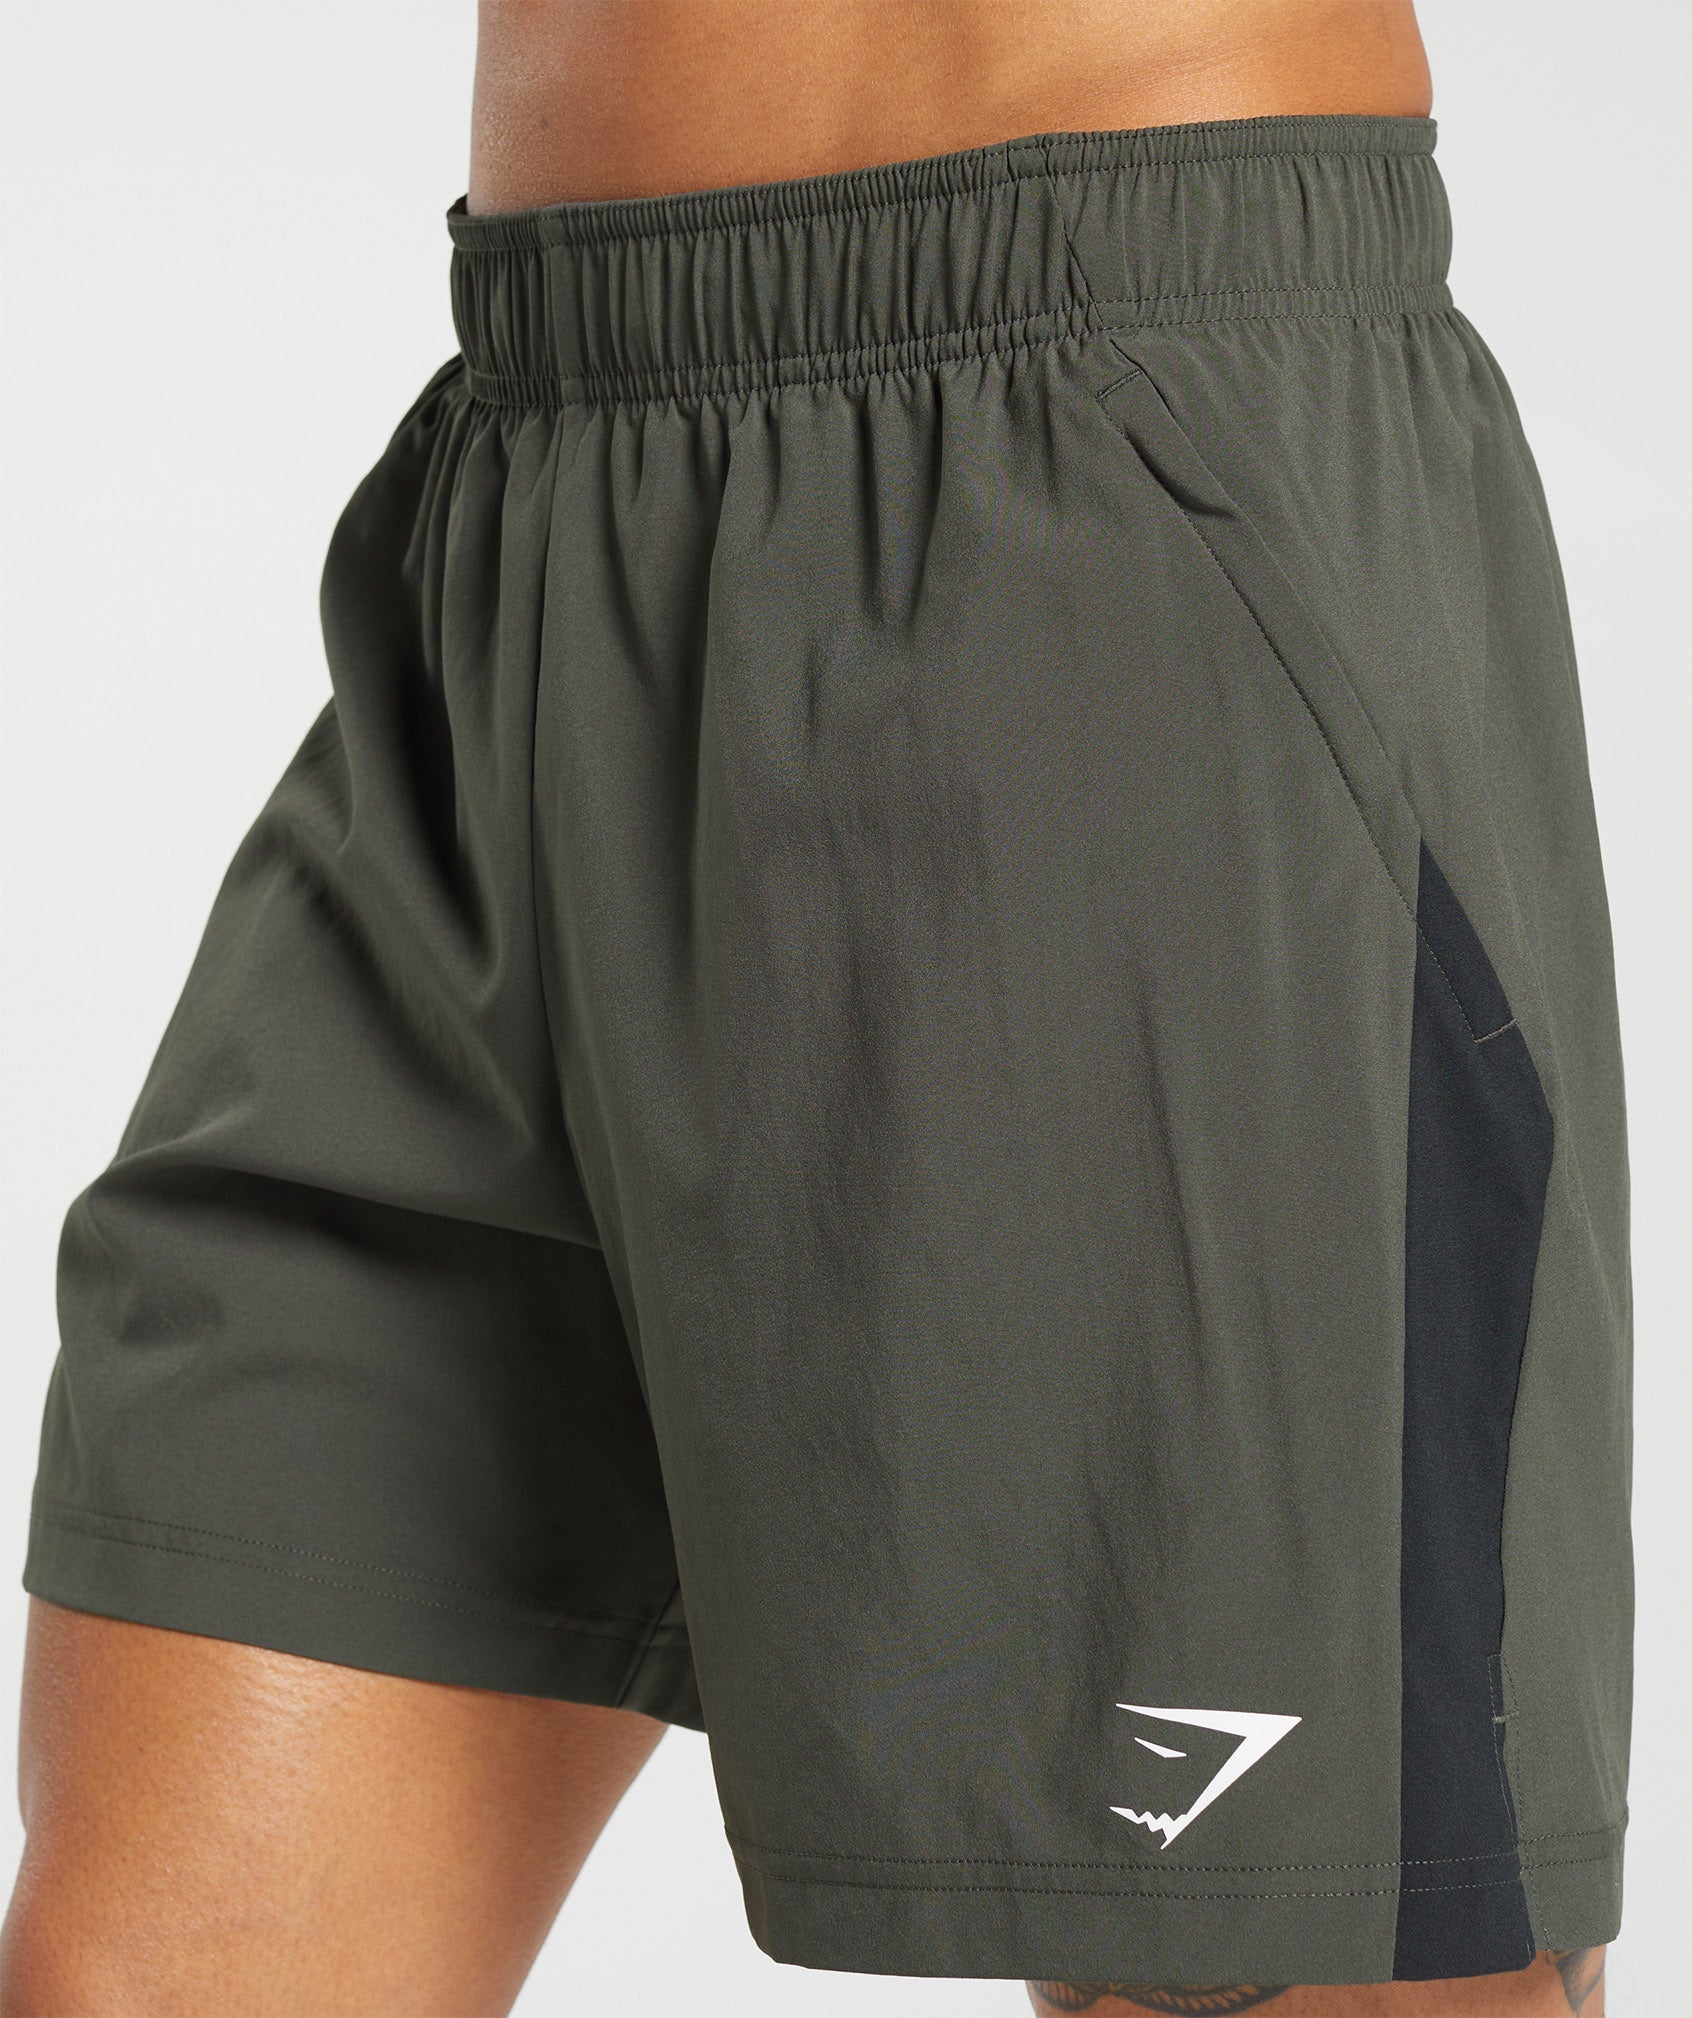 Sport 7" Shorts in Strength Green/Black - view 5